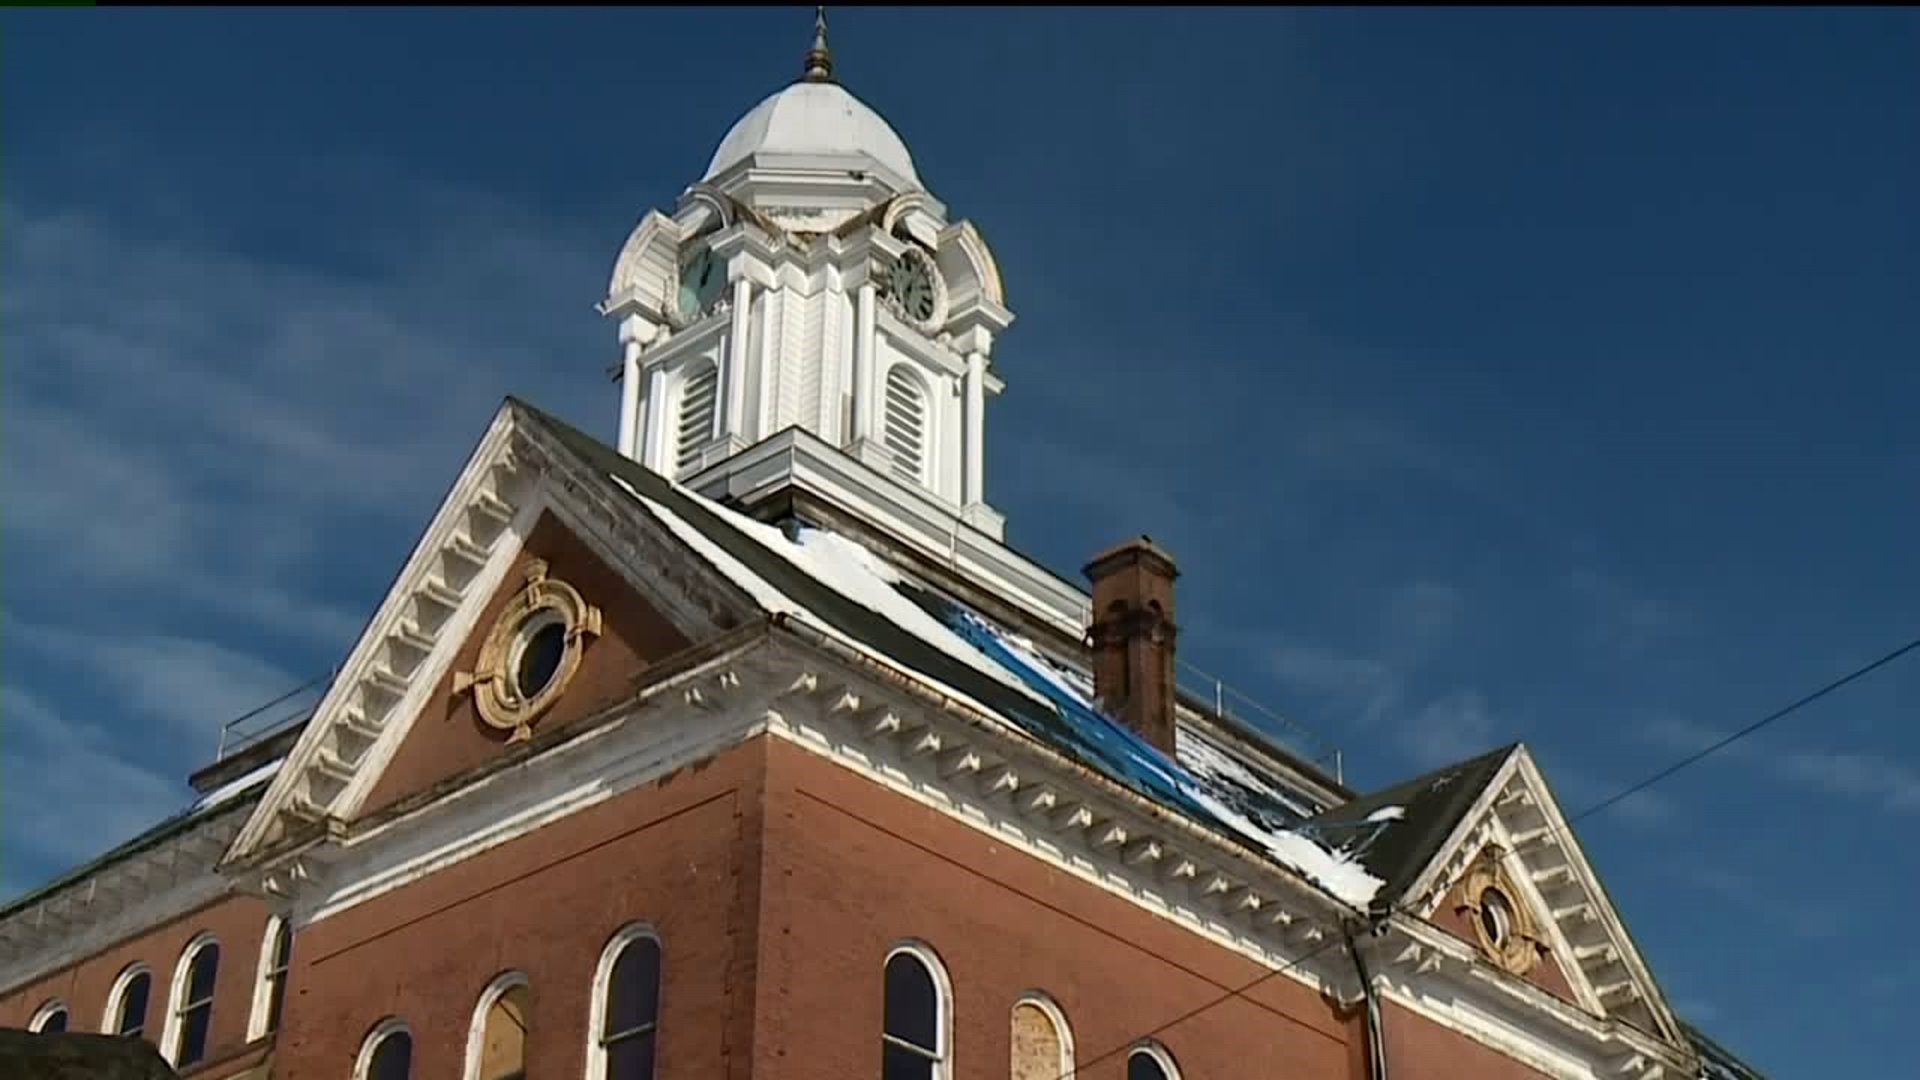 Group Works to Fix Clock Tower in Carbon County